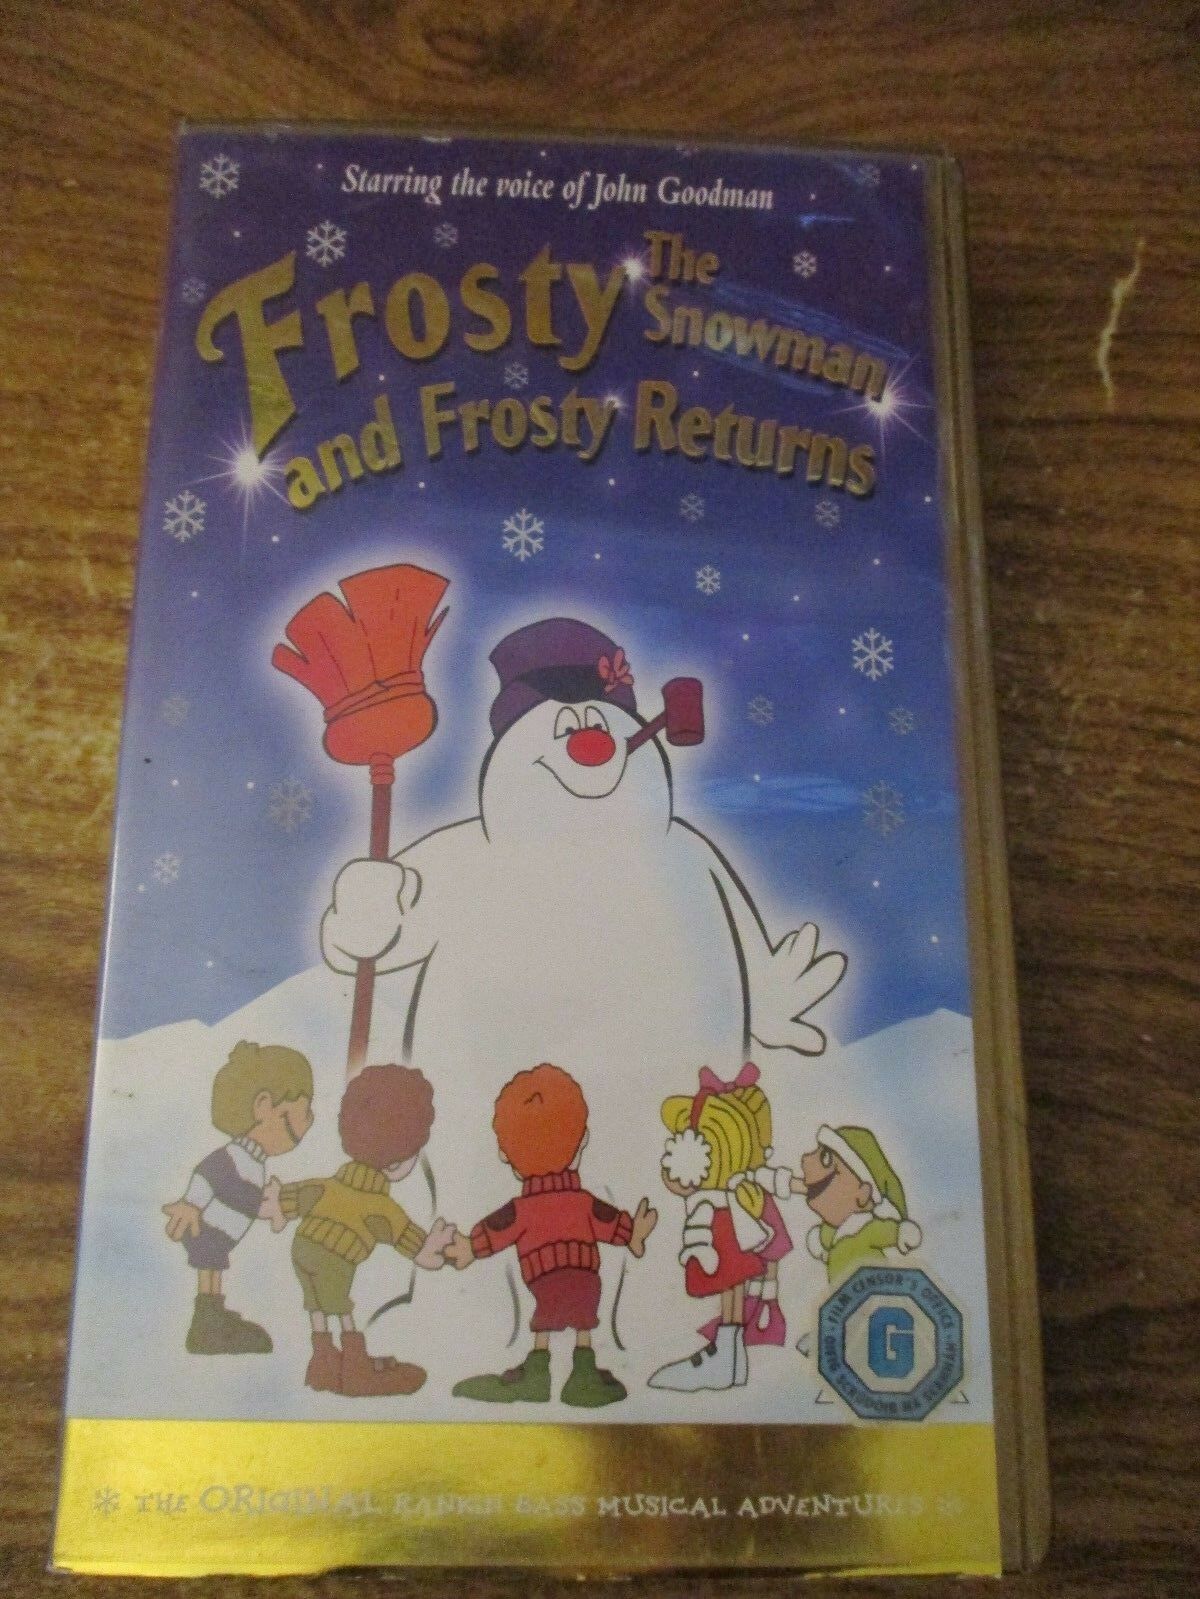 Frosty the Snowman and Frosty Returns | Warner Home Video (UK) Wiki ...